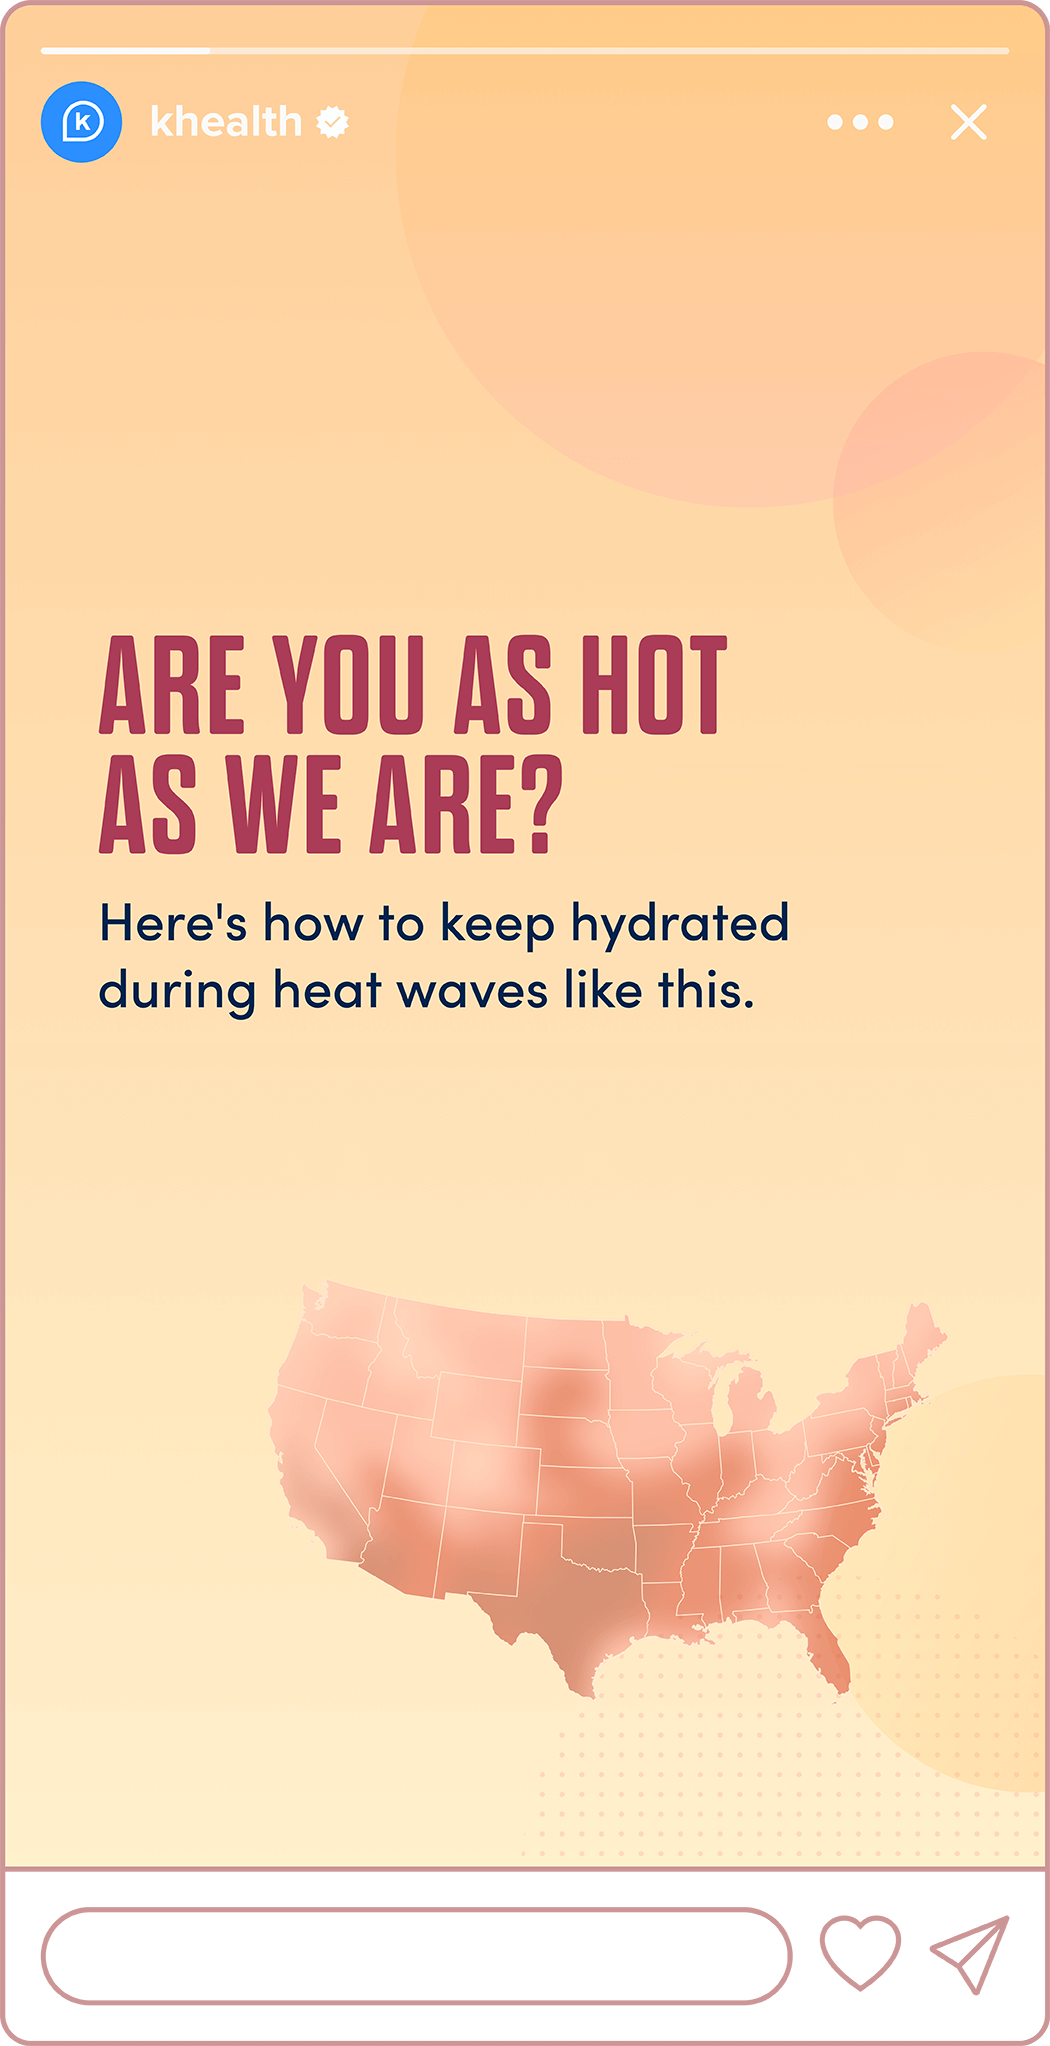 Instagram story directing people to an article with tips on staying hydrated during a heatwave